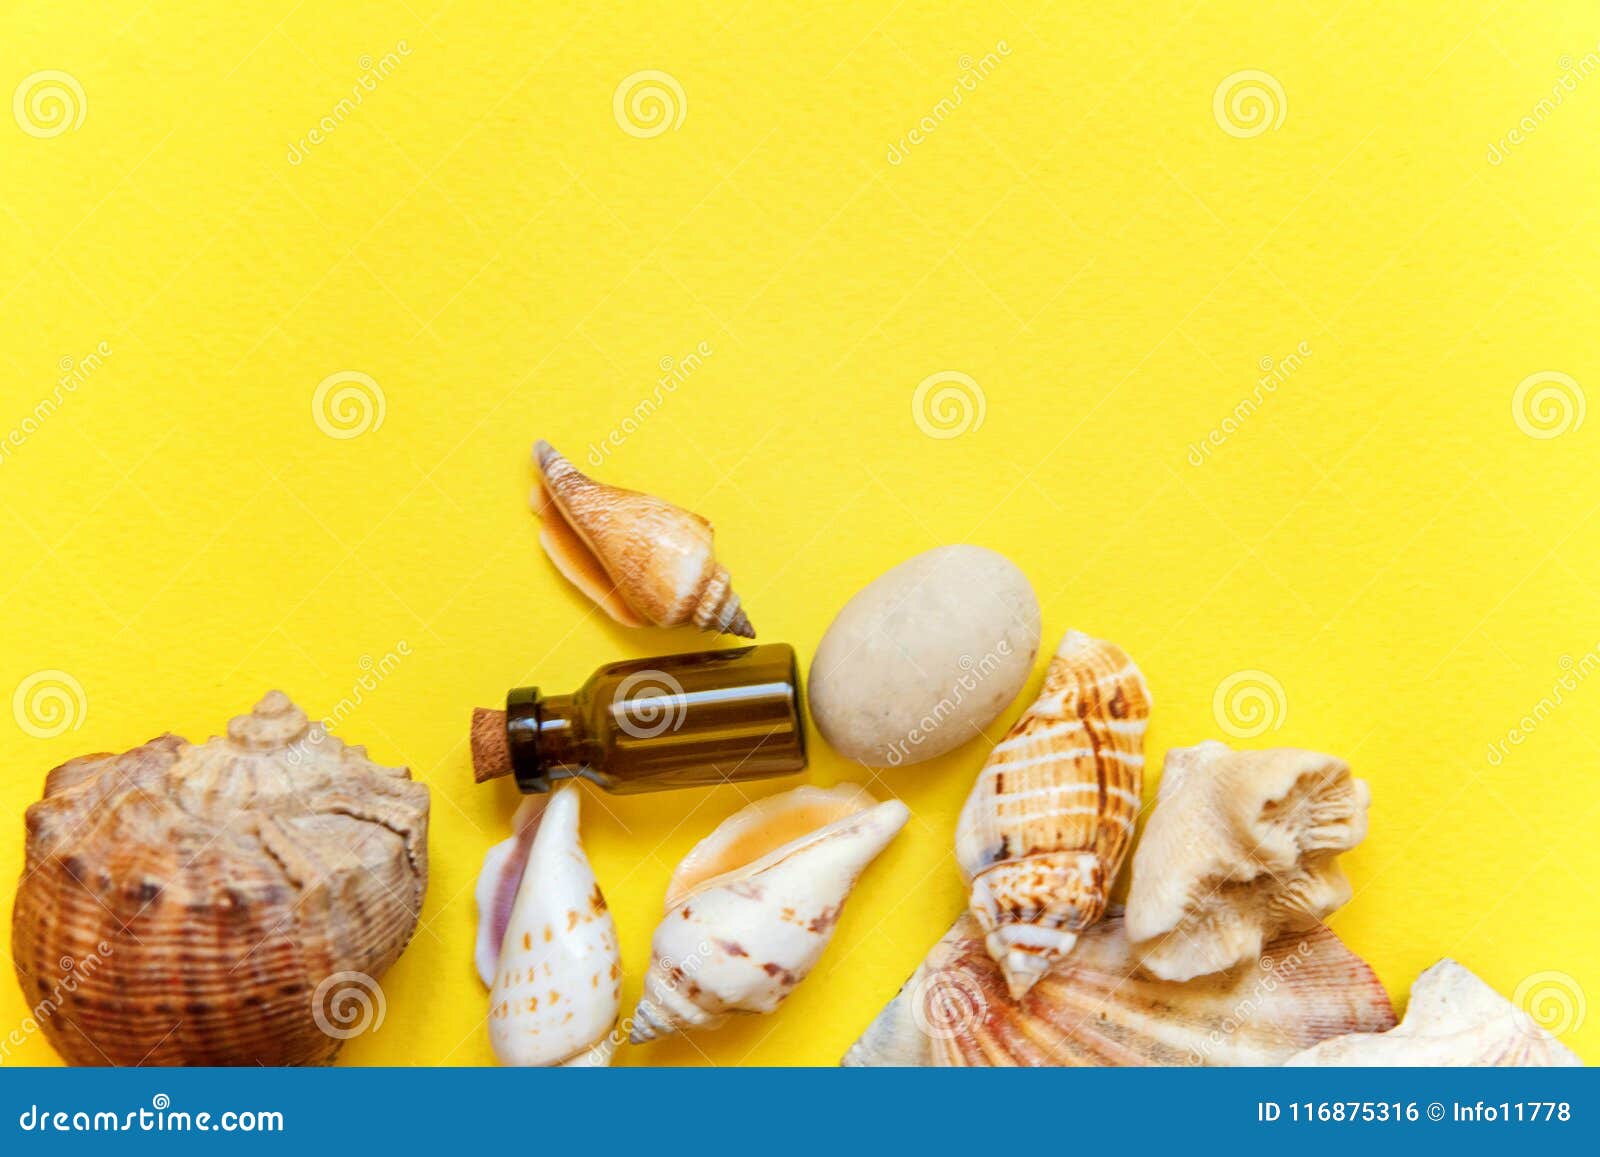 Seashells And Glass Bottle On A Yellow Background Stock Photo Image Of Sand Summer 116875316